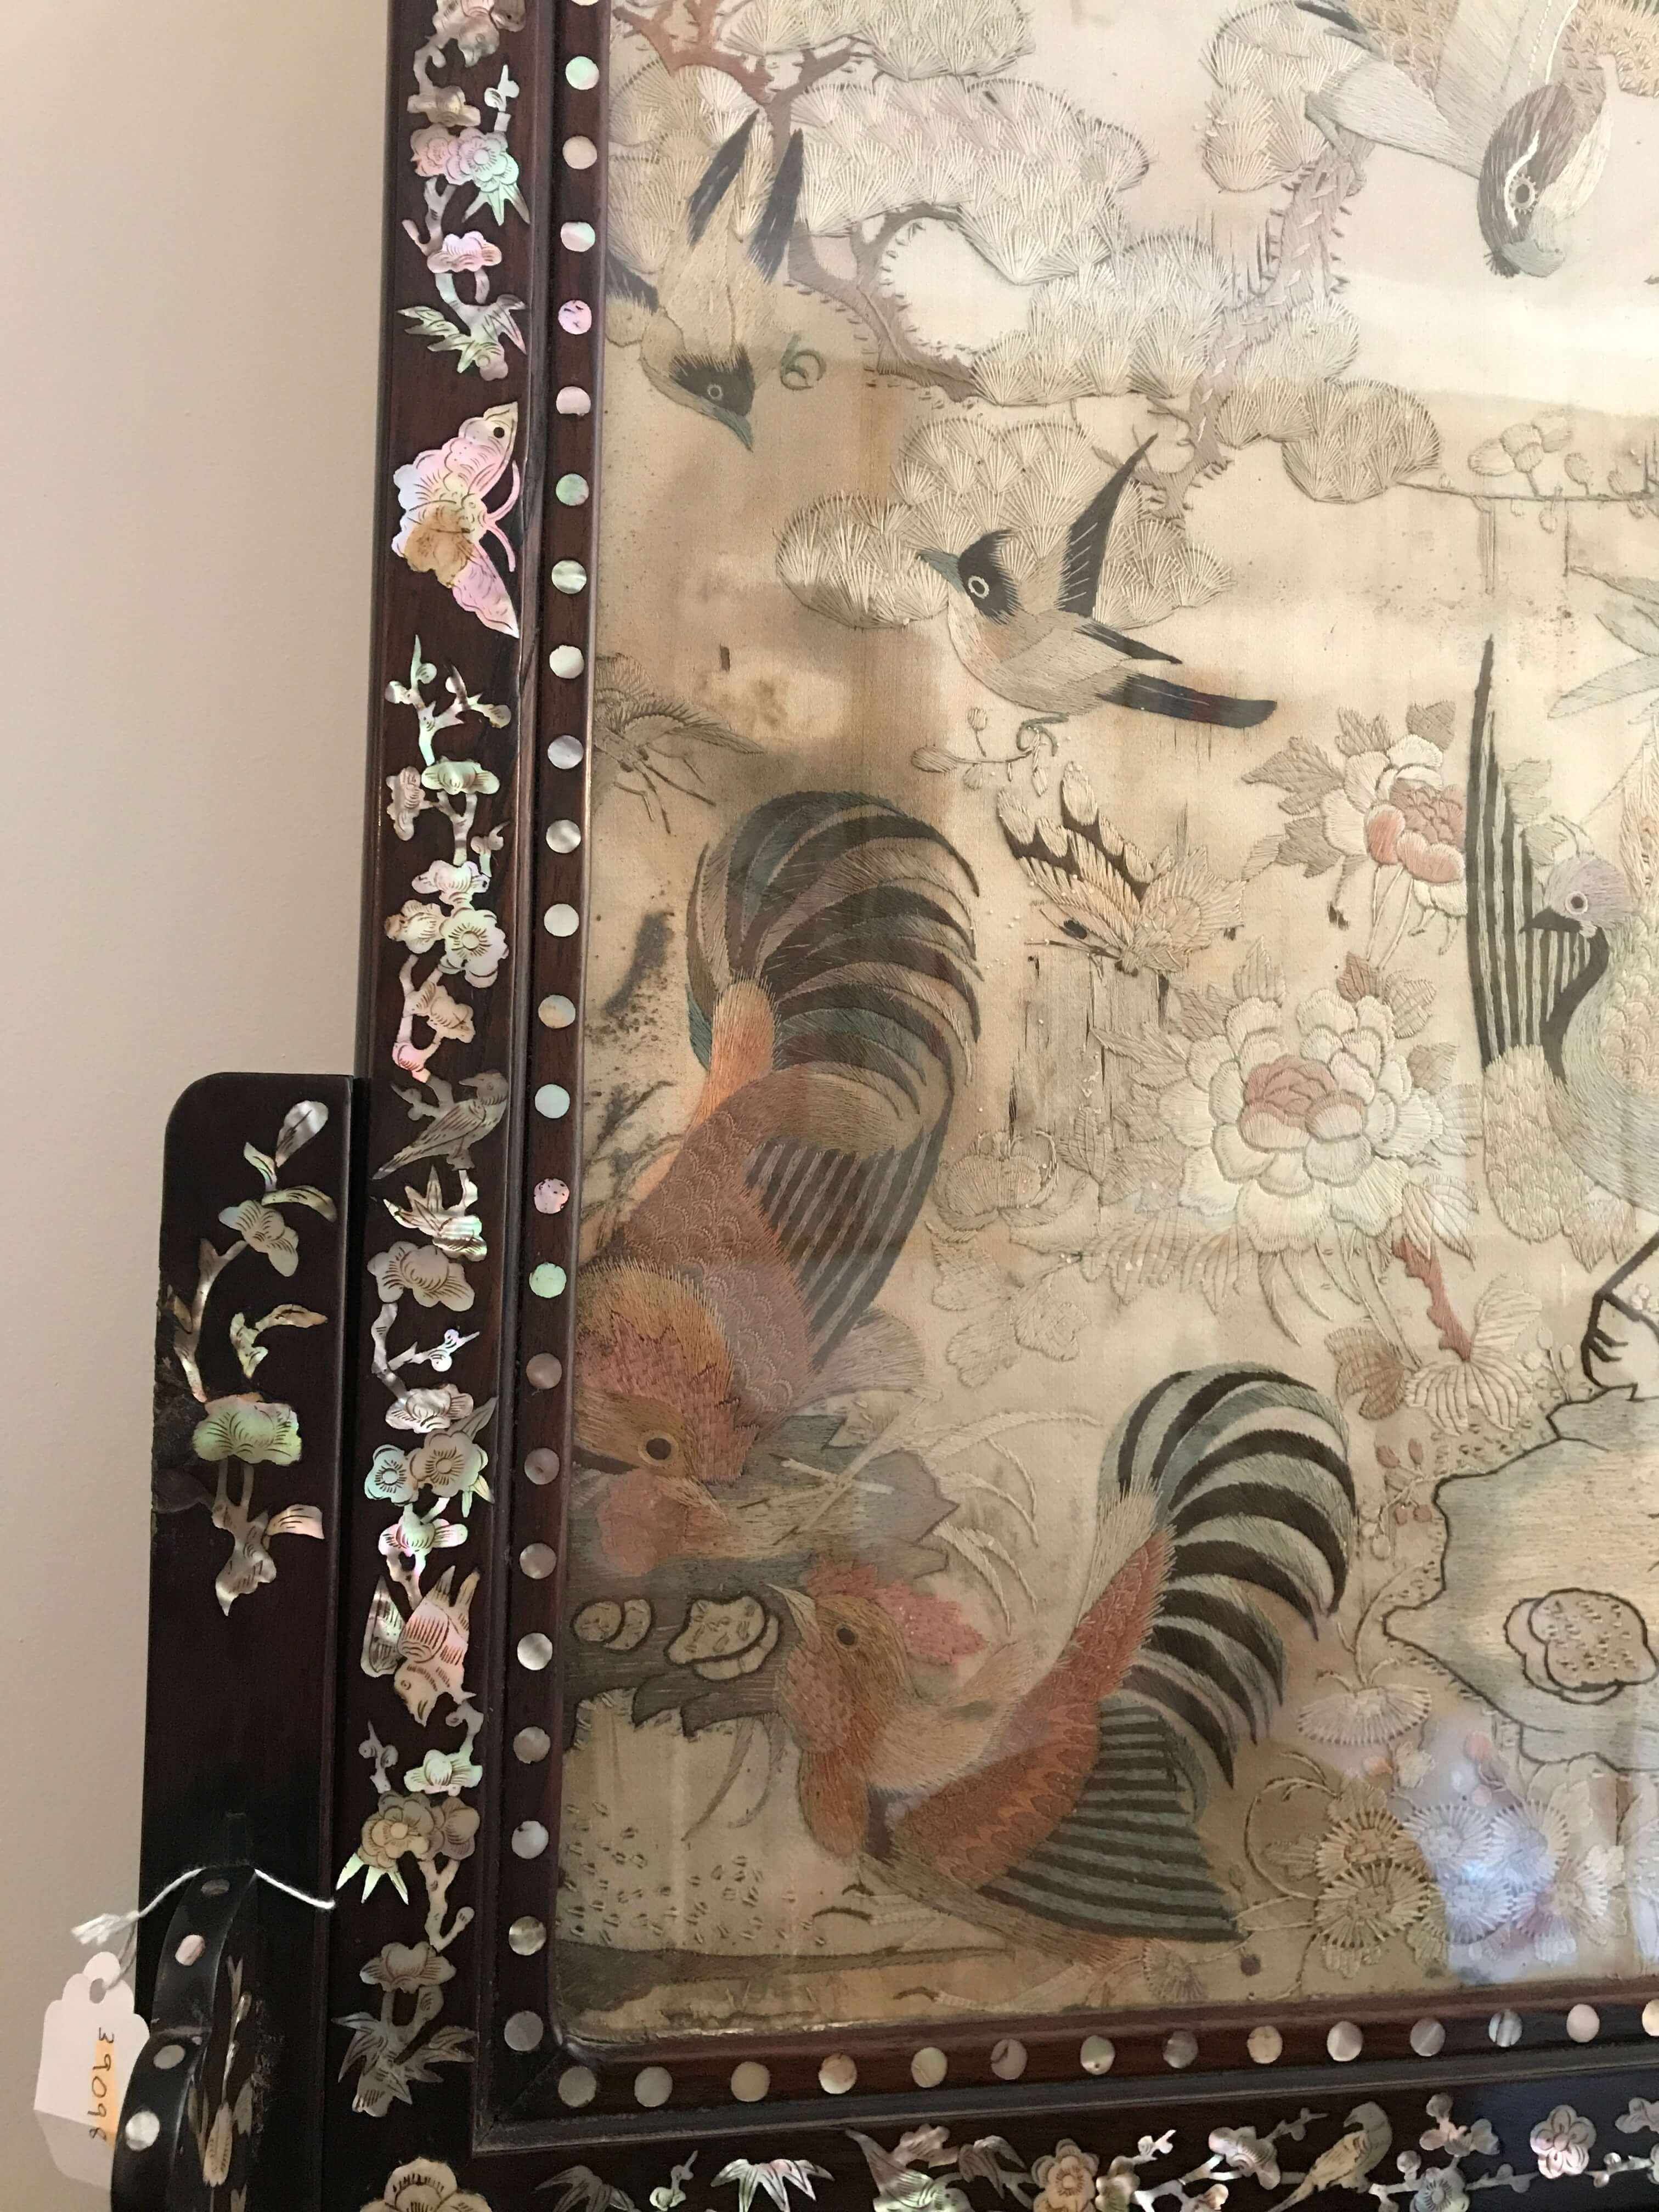 A Chinese Export ebonised, hardwood and mother-of-pearl inlaid table screen, late 19th century